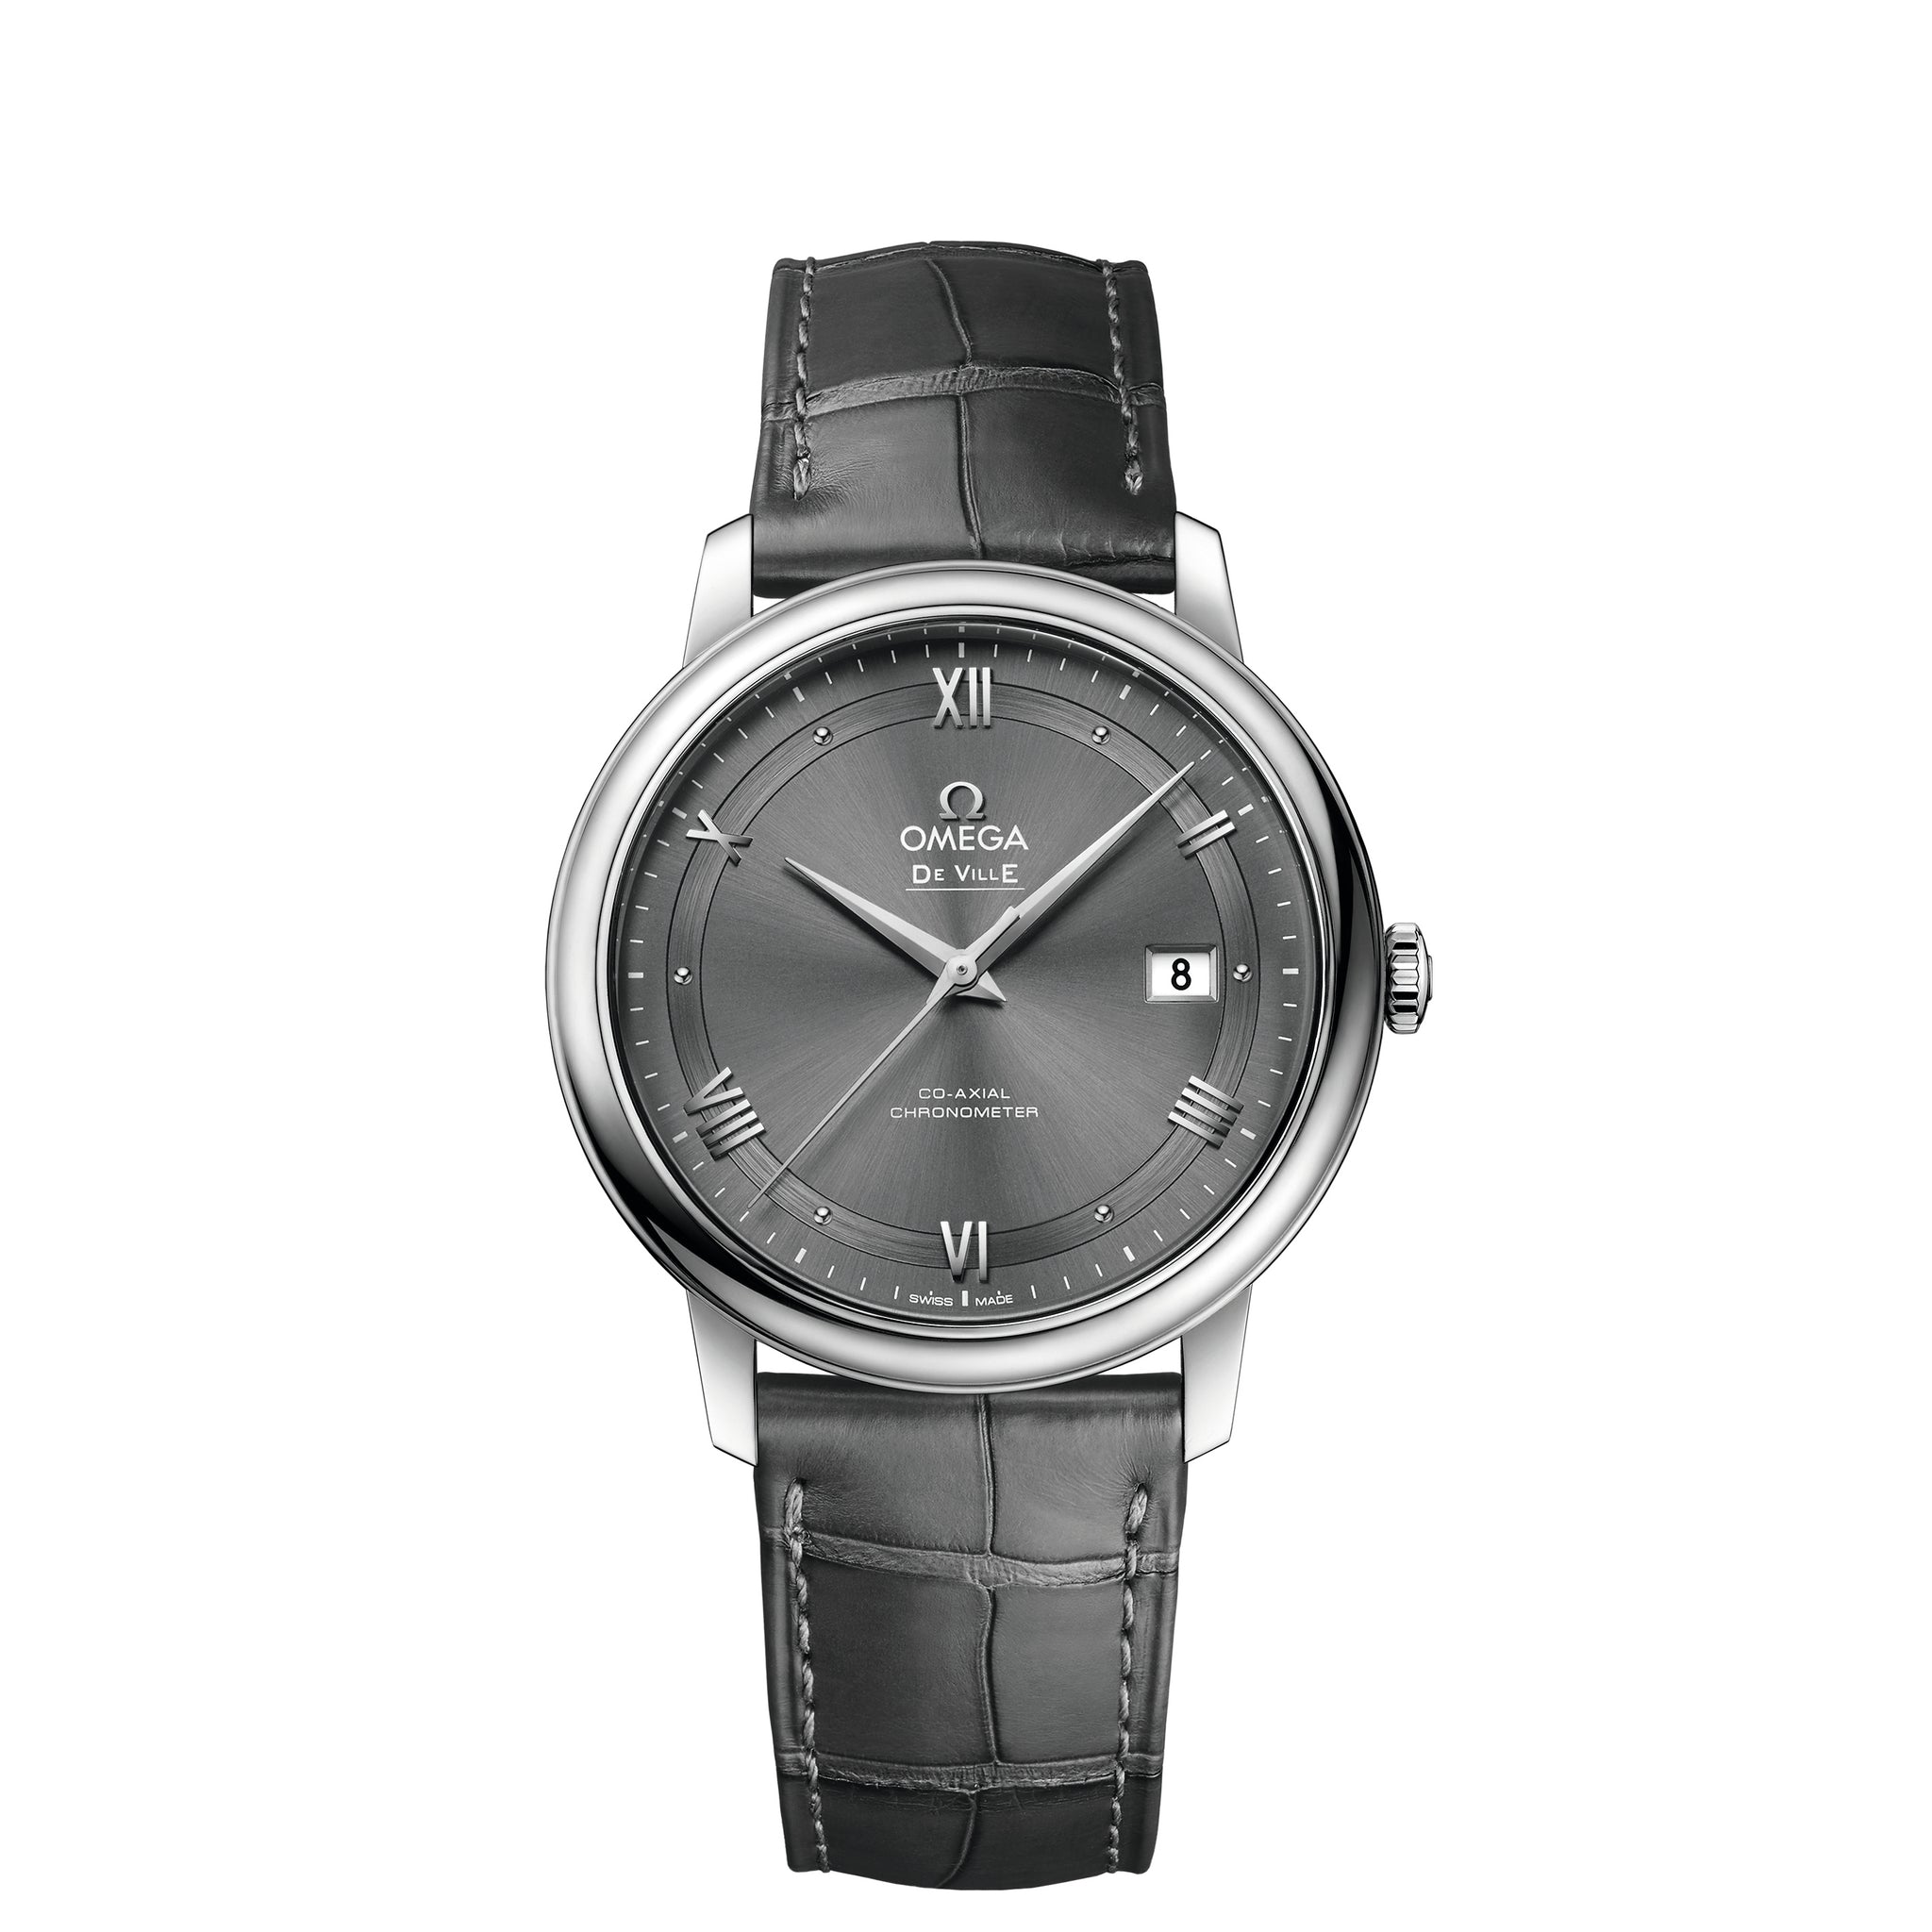 De Ville Prestige Co-Axial Watch with Stainless Steel Case and grey dial presented on a grey leatehr strap. 